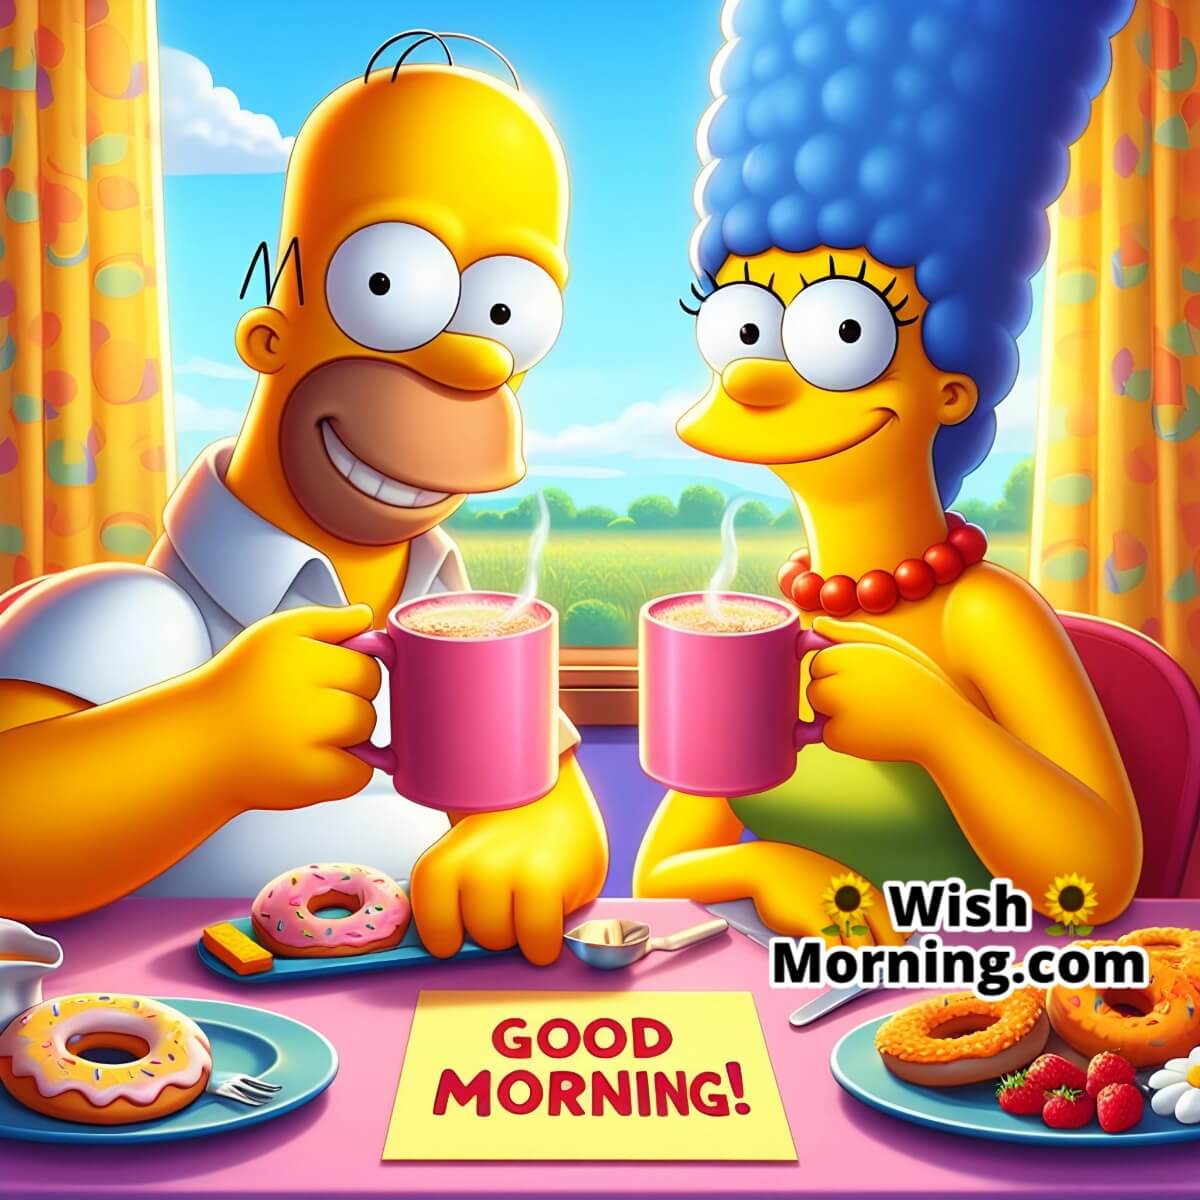 Good Morning Homer Simpson & Marge Simpson Picture